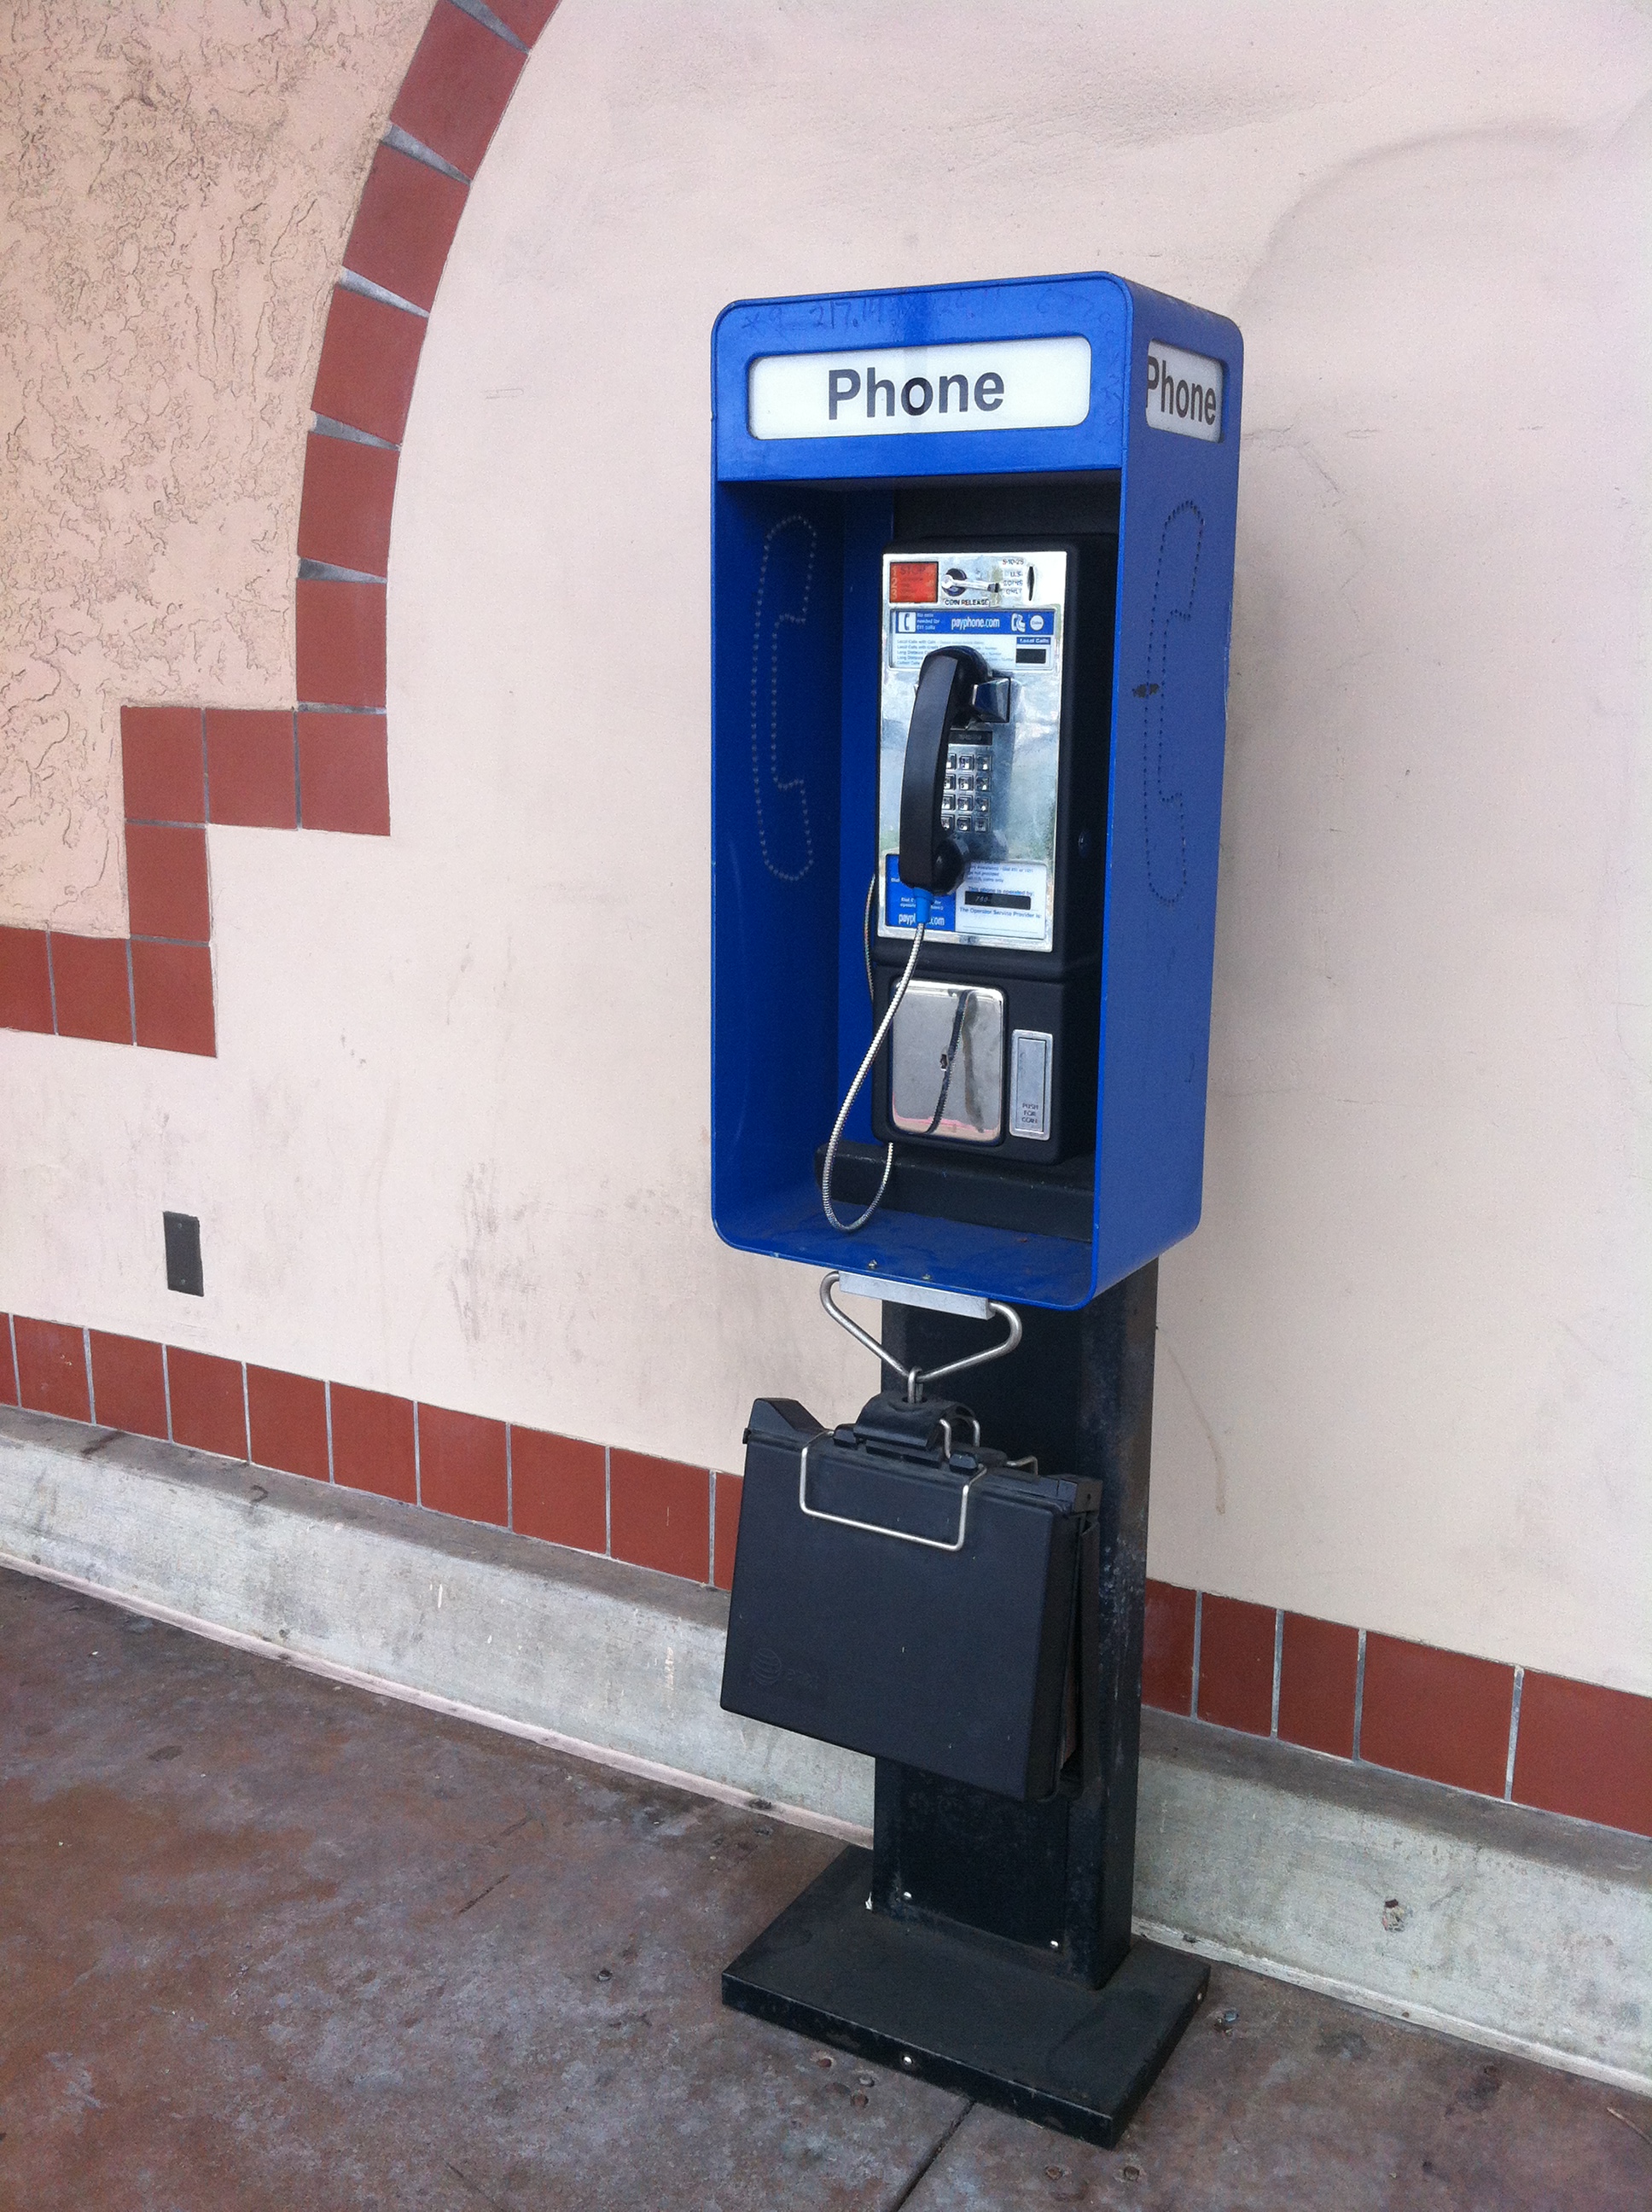 Deb's Son Asks How to Use a Payphone | WFMS